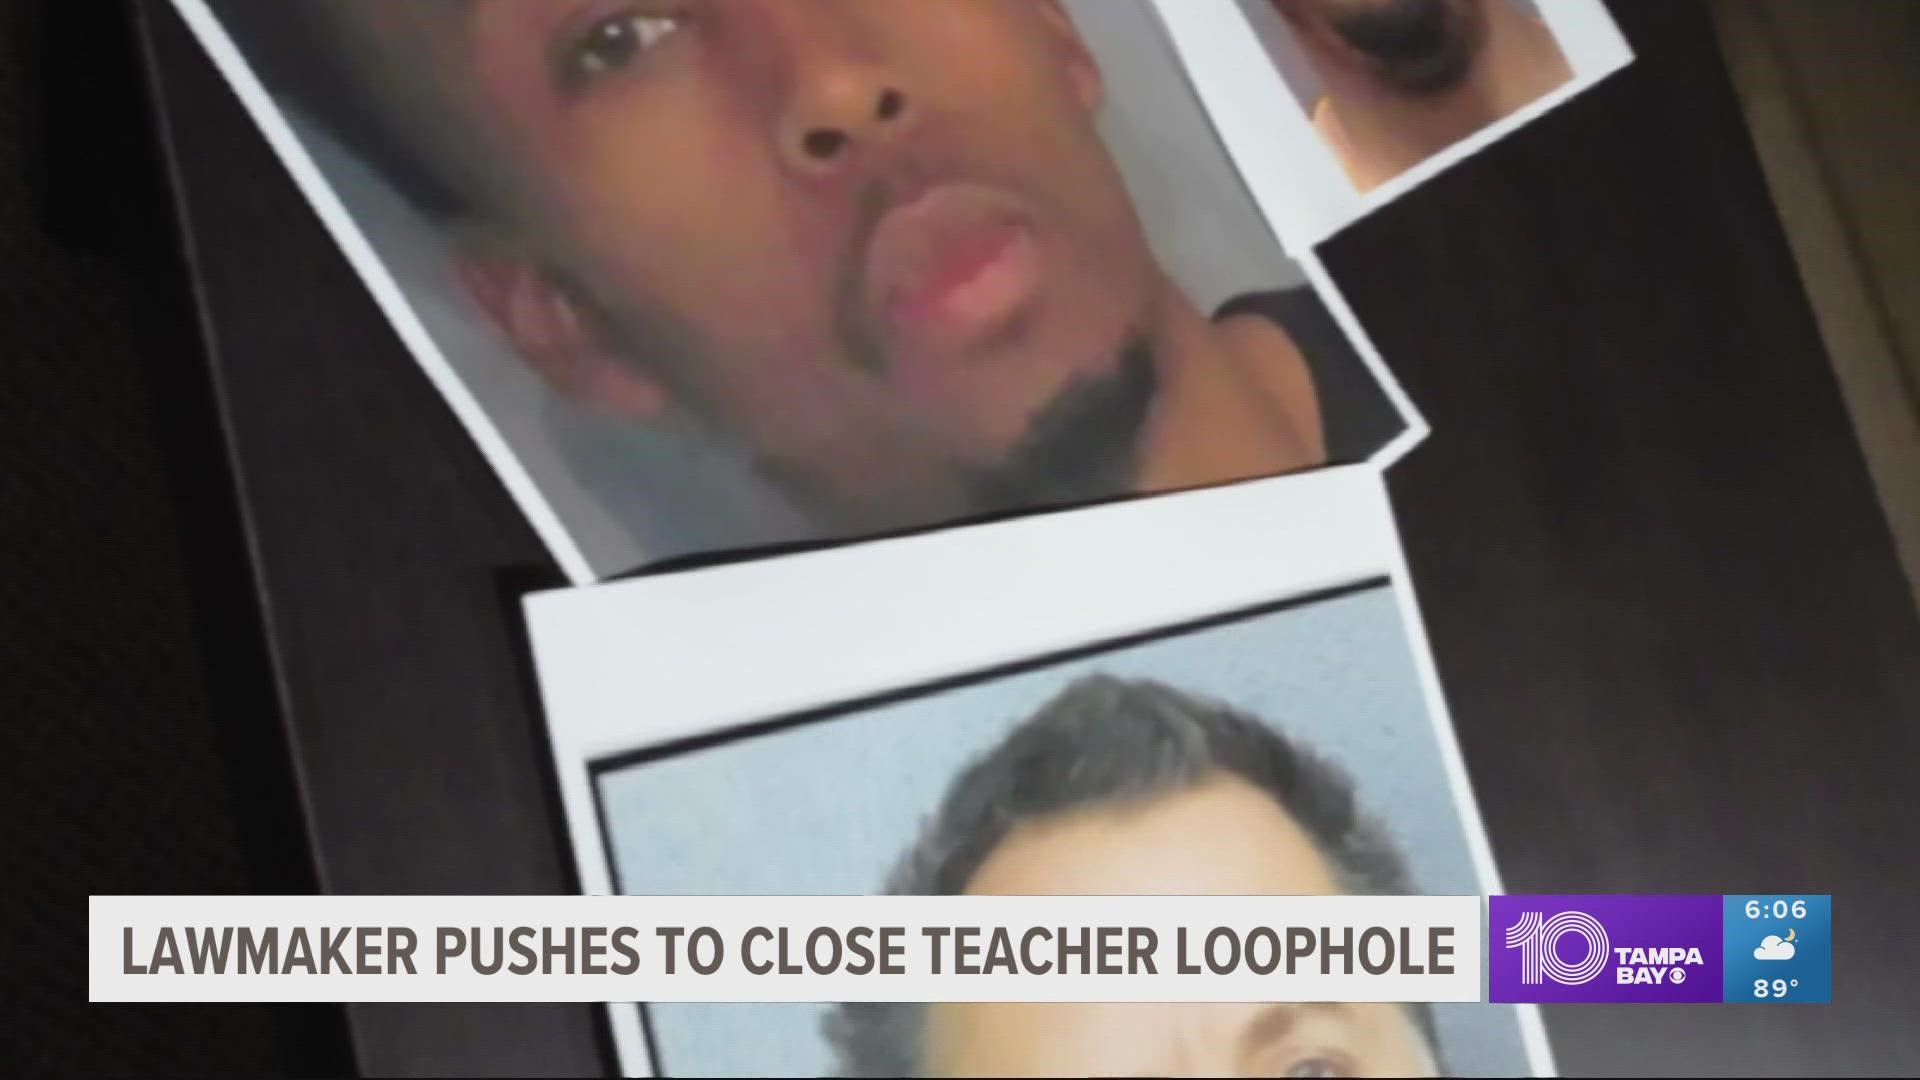 10 Investigates found three teachers under investigation for alleged crimes against students were able to be hired in other places.